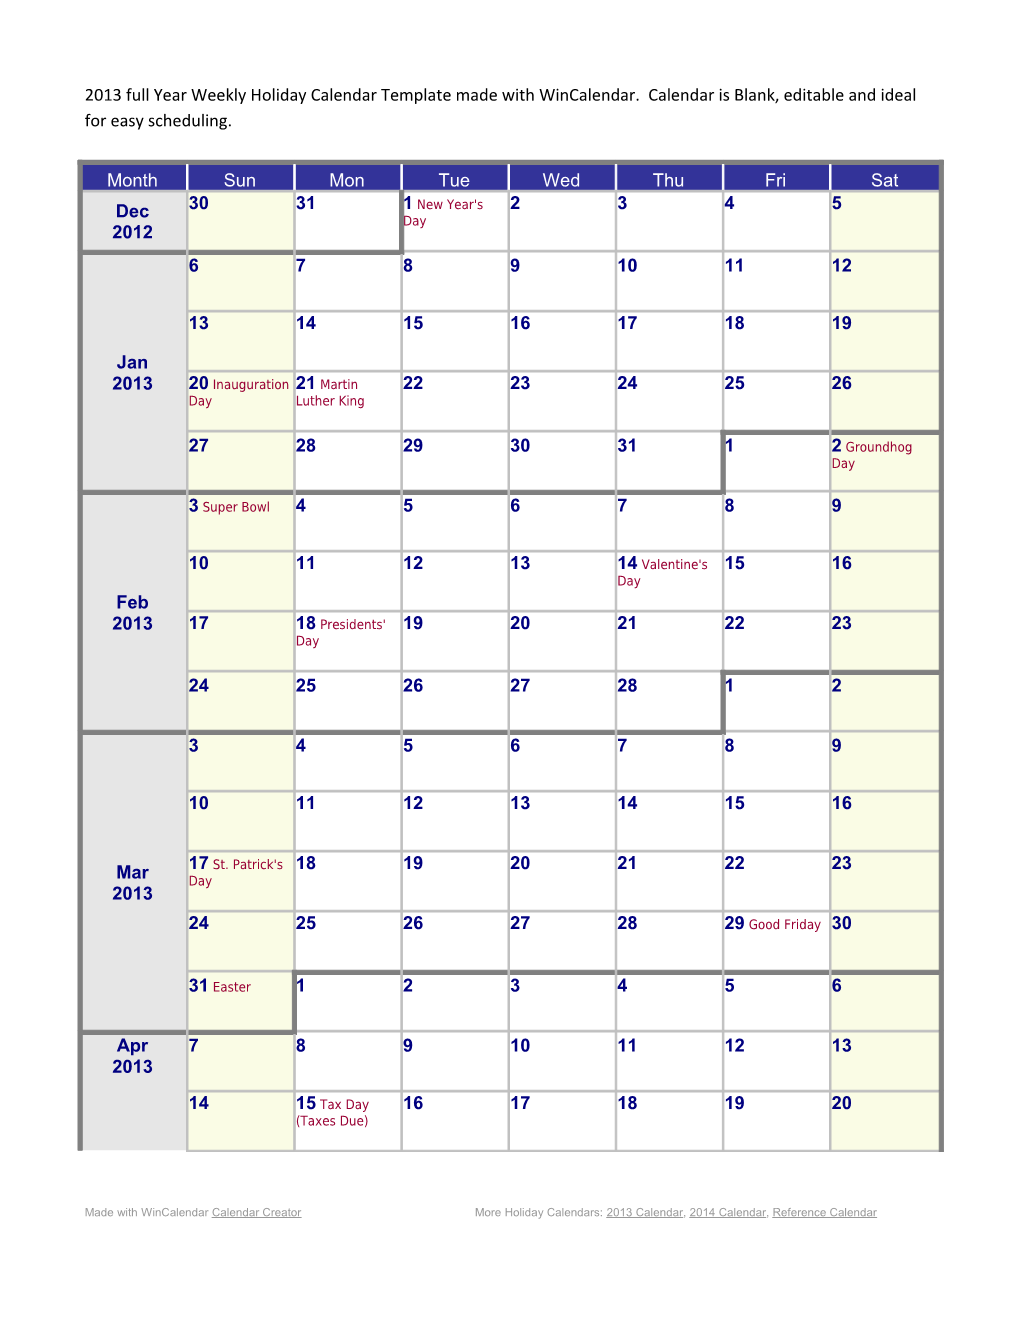 Weekly Calendar for 2013 with Holidays